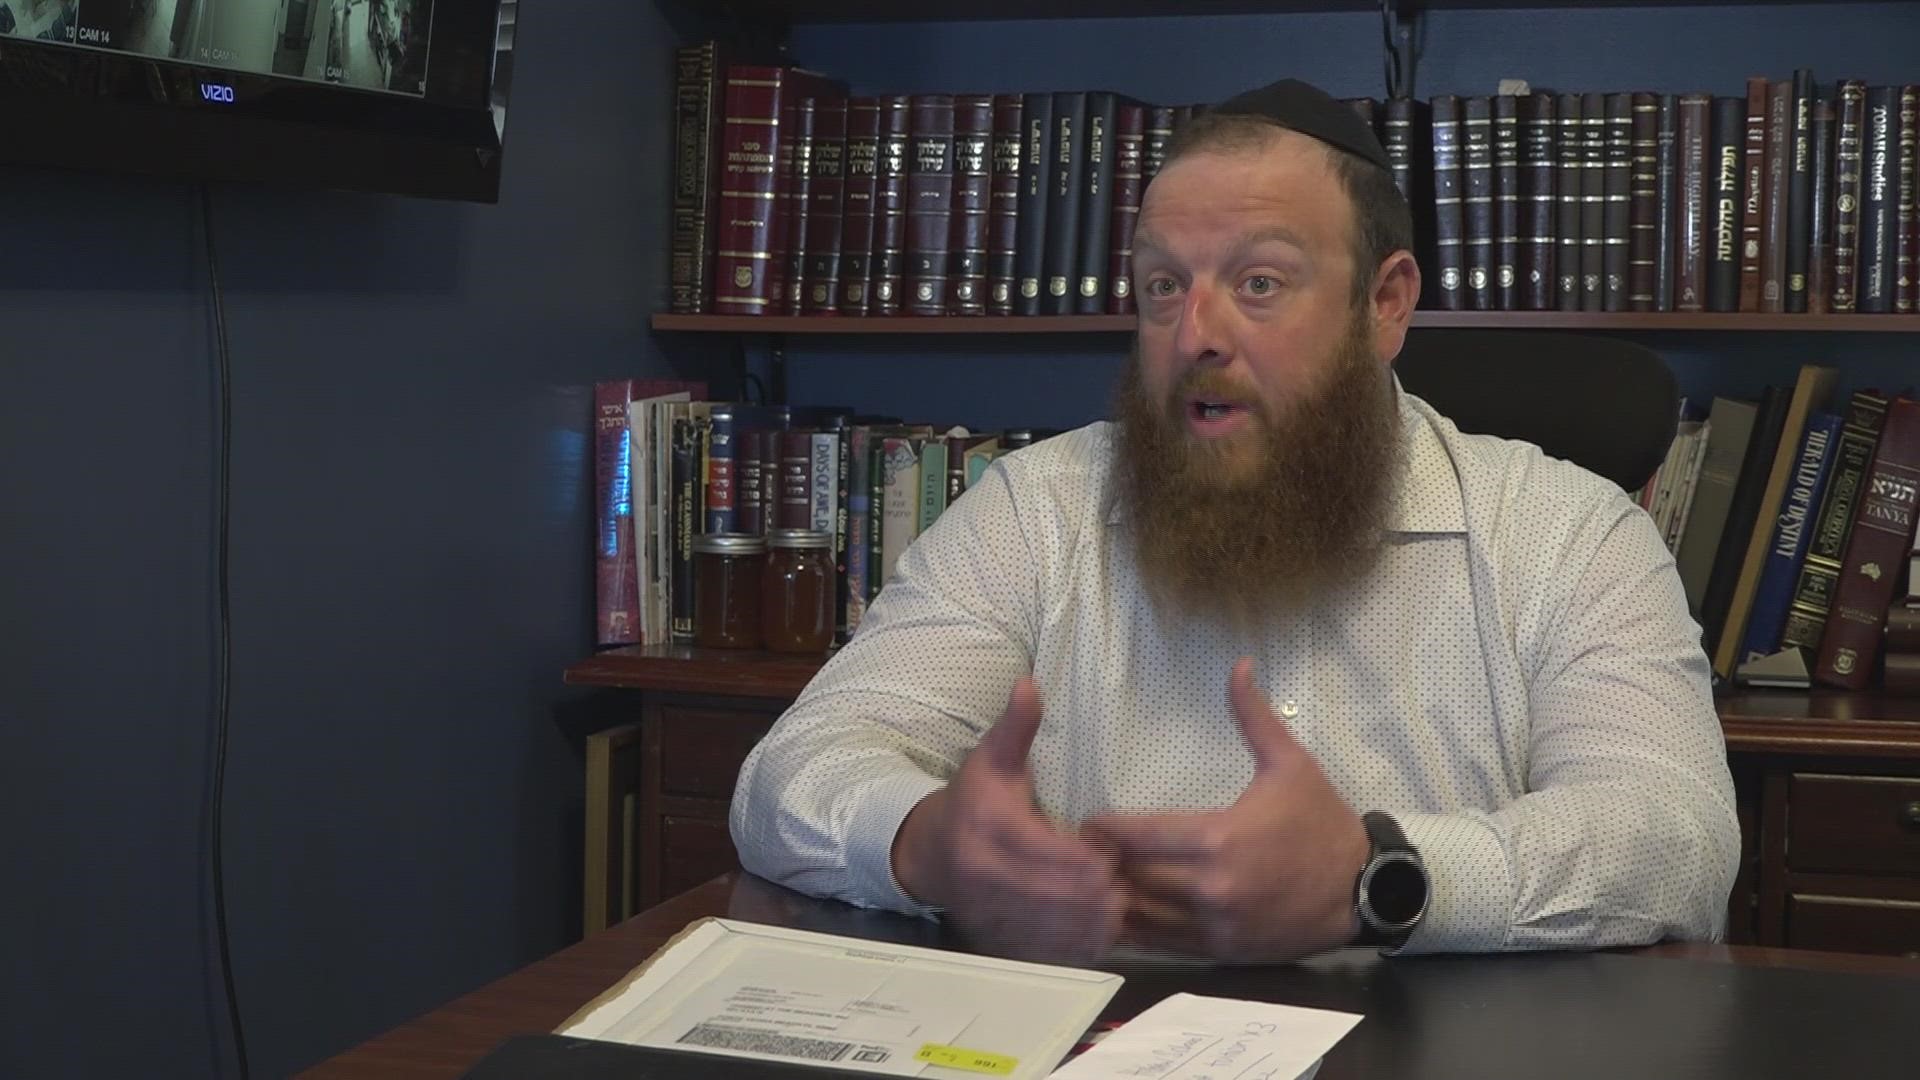 A Jacksonville rabbi says that after antisemitic displays in the city's Downtown, he is afraid for his safety.